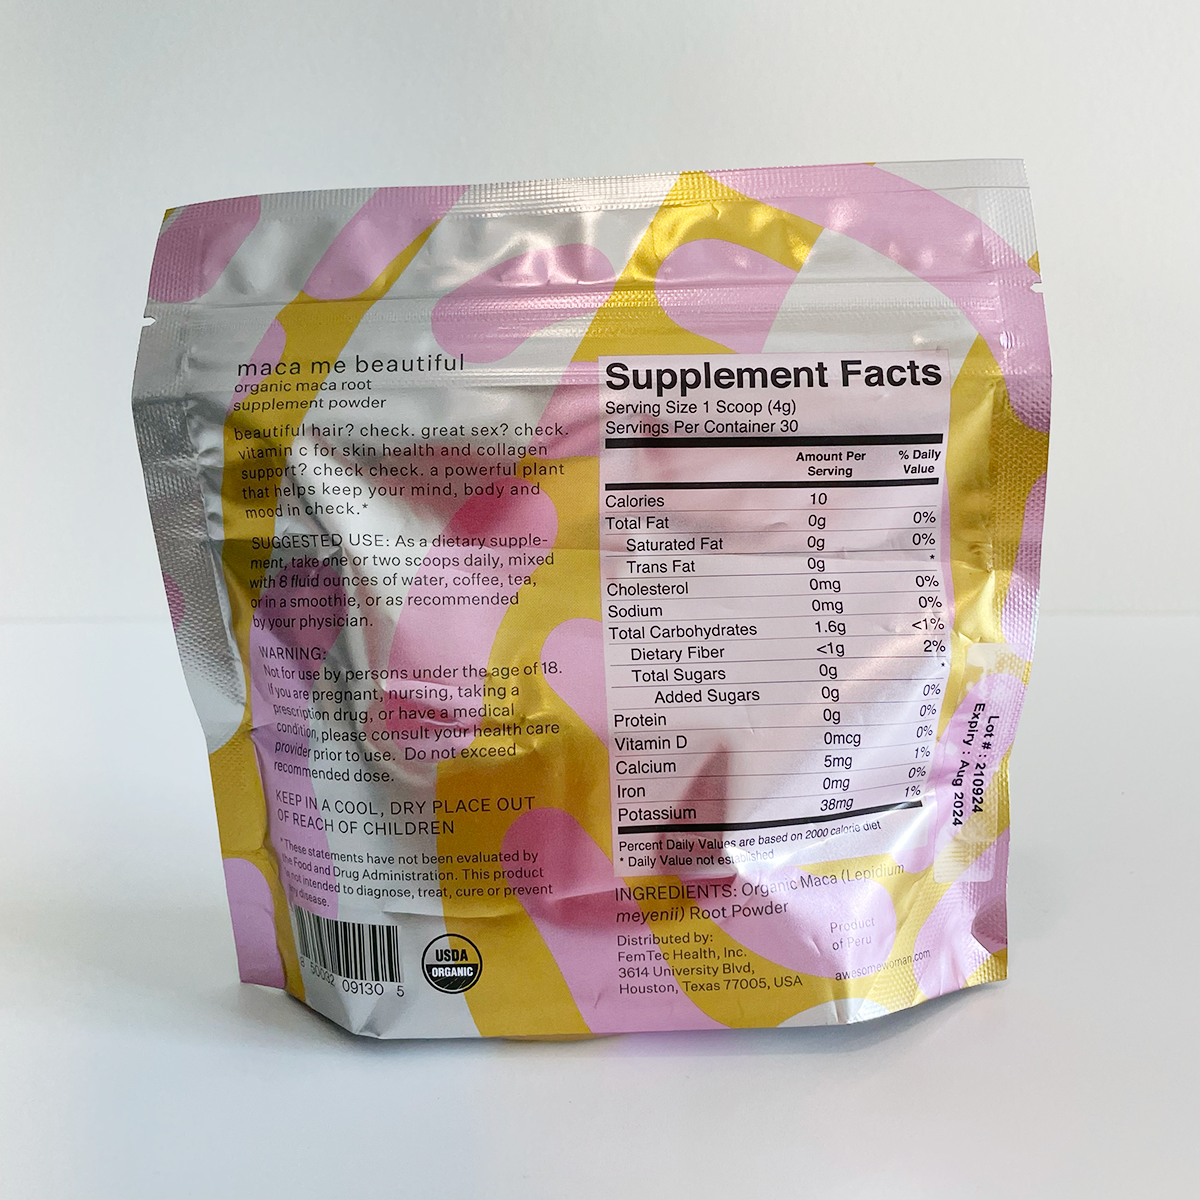 maca powder bag with nutritional facts labeled